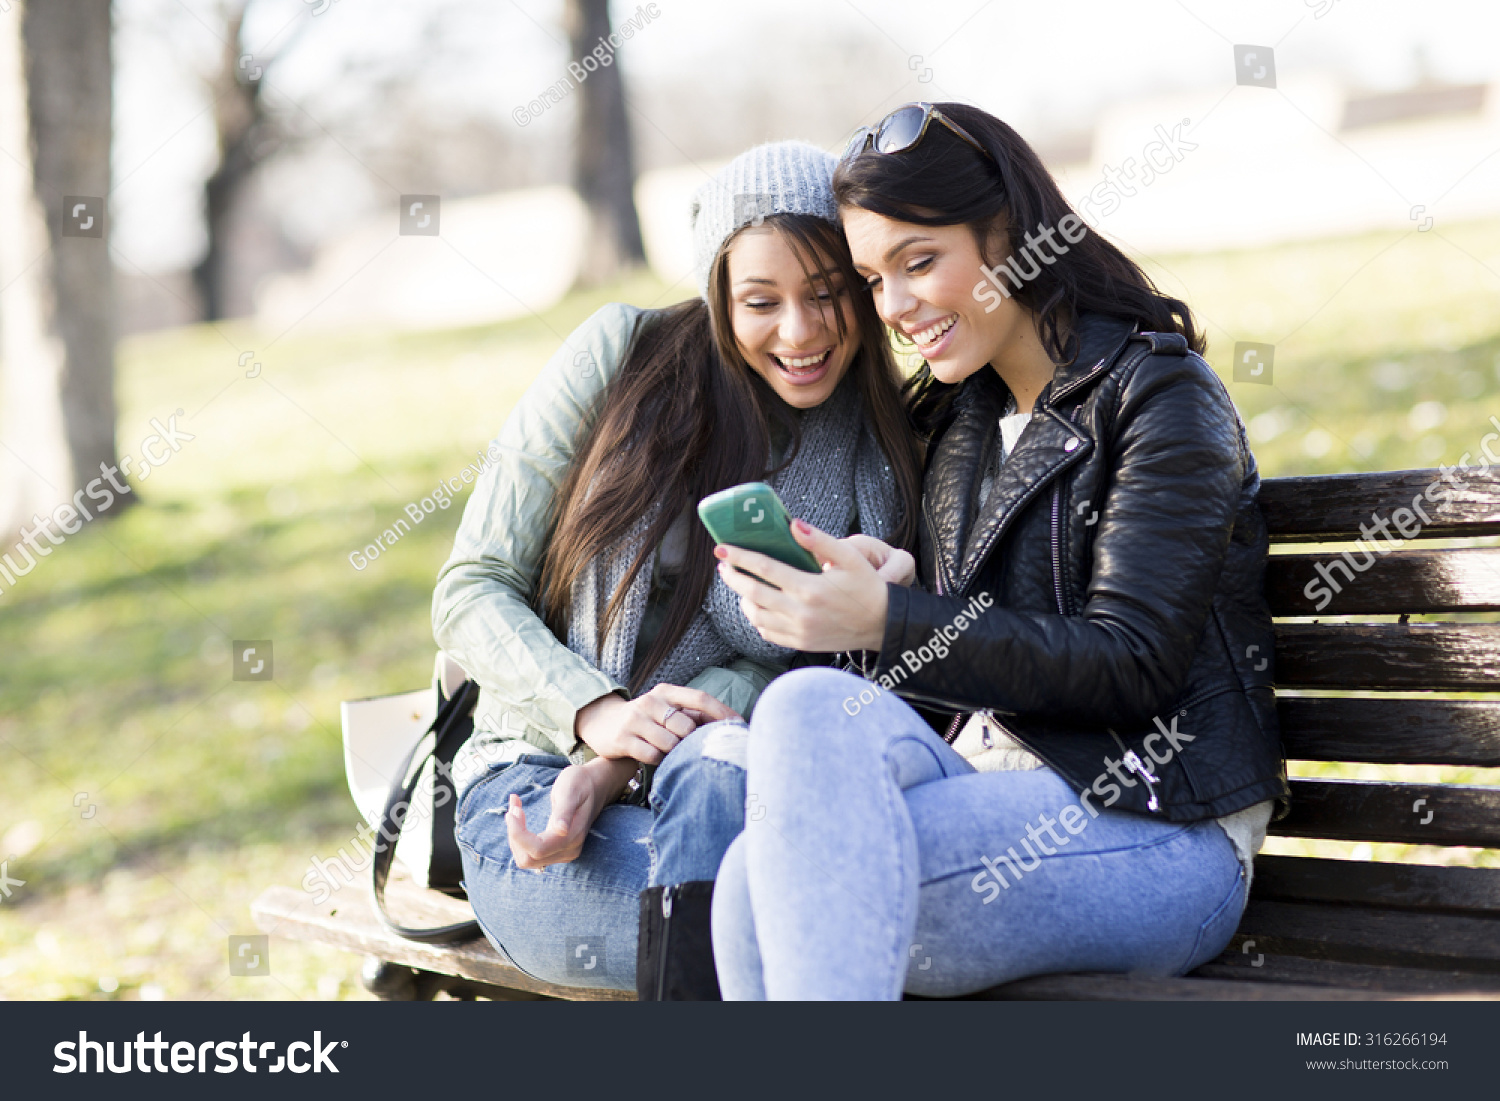 Young women on the bench #316266194